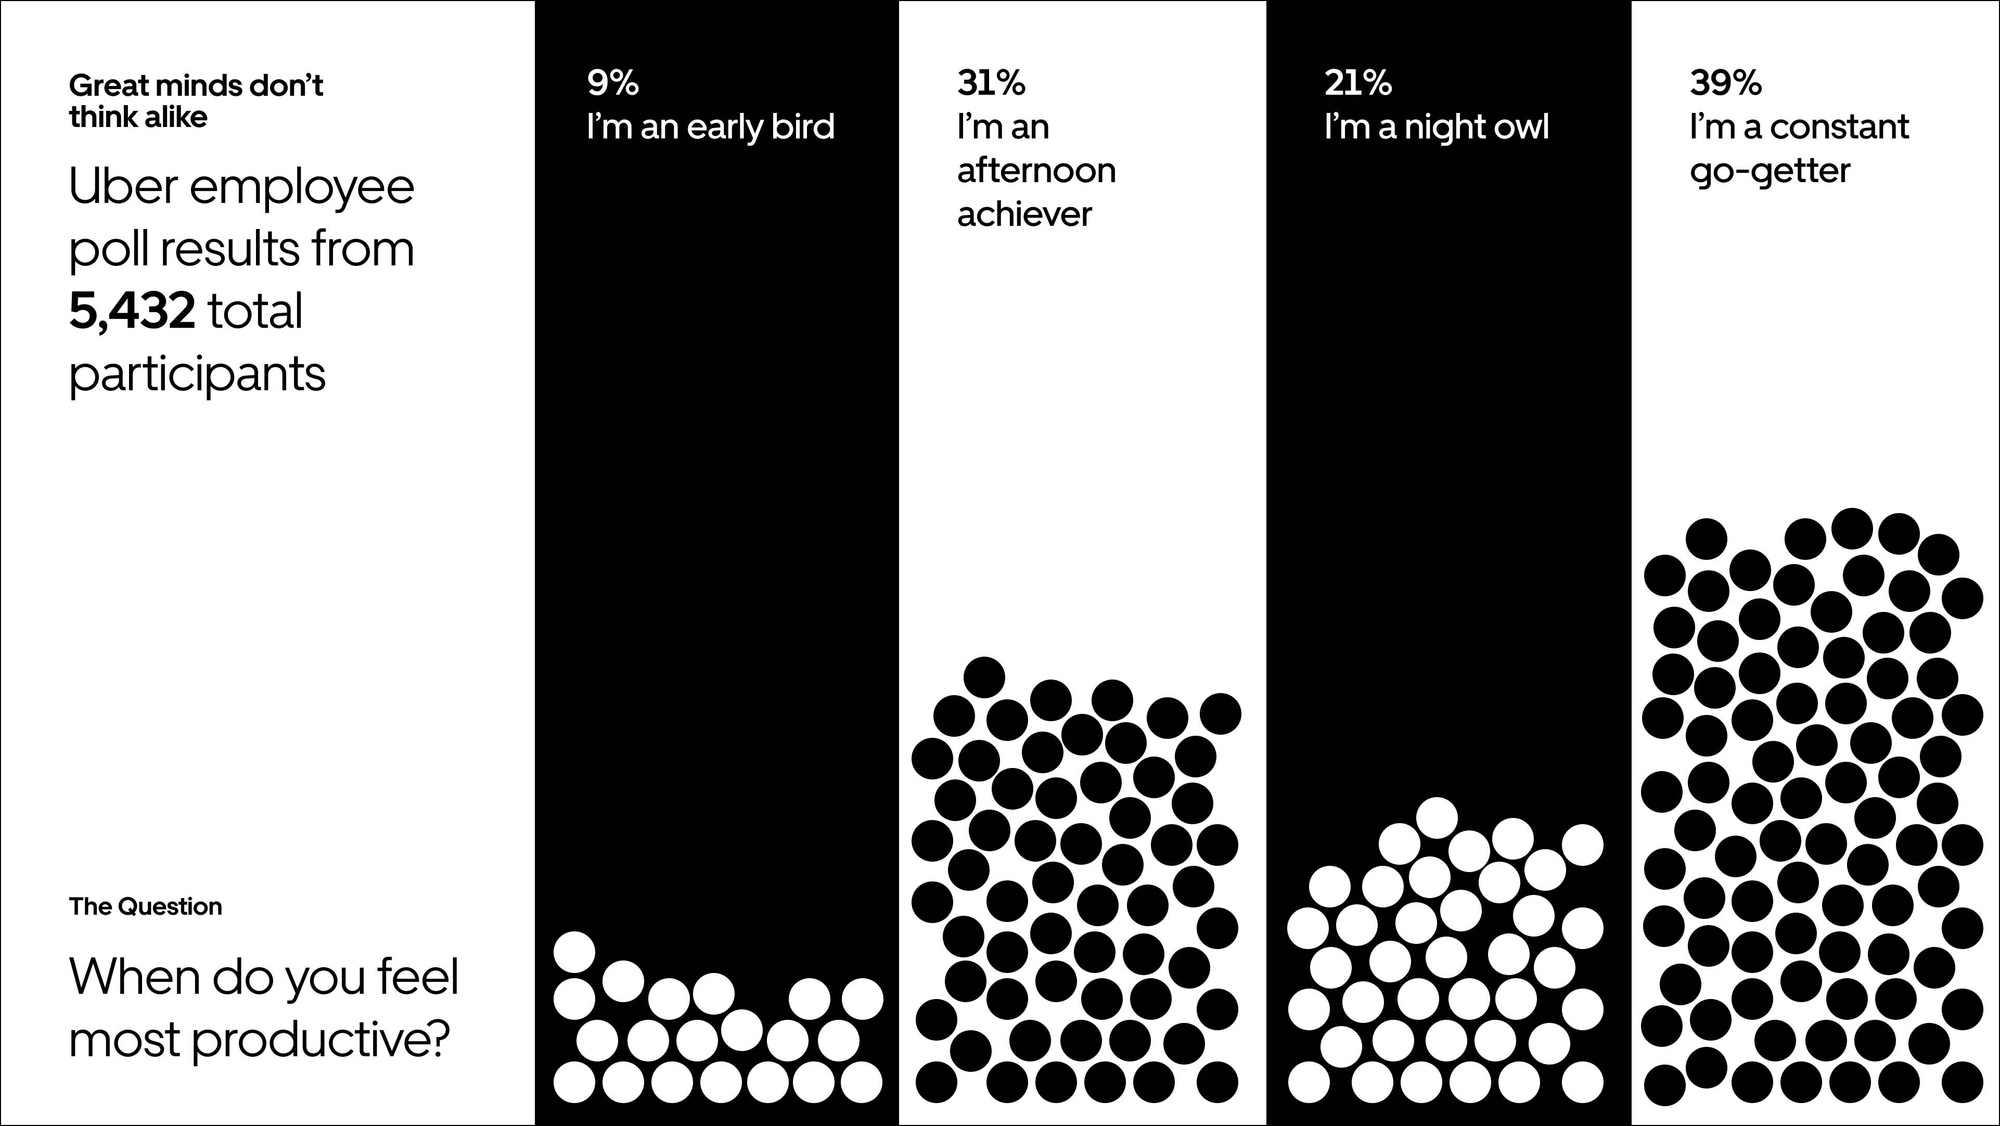 Alternating black and white background stripes with opposing dot colors within at the bottom of the rectangle. Title reads "Uber employee poll results from 5,432 total participants, the question: When do you feel most productive." From left to right "9% I'm an early bird; 31% I'm an afternoon achiever; 21% I'm a night owl; 39% I'm a constant go-getter